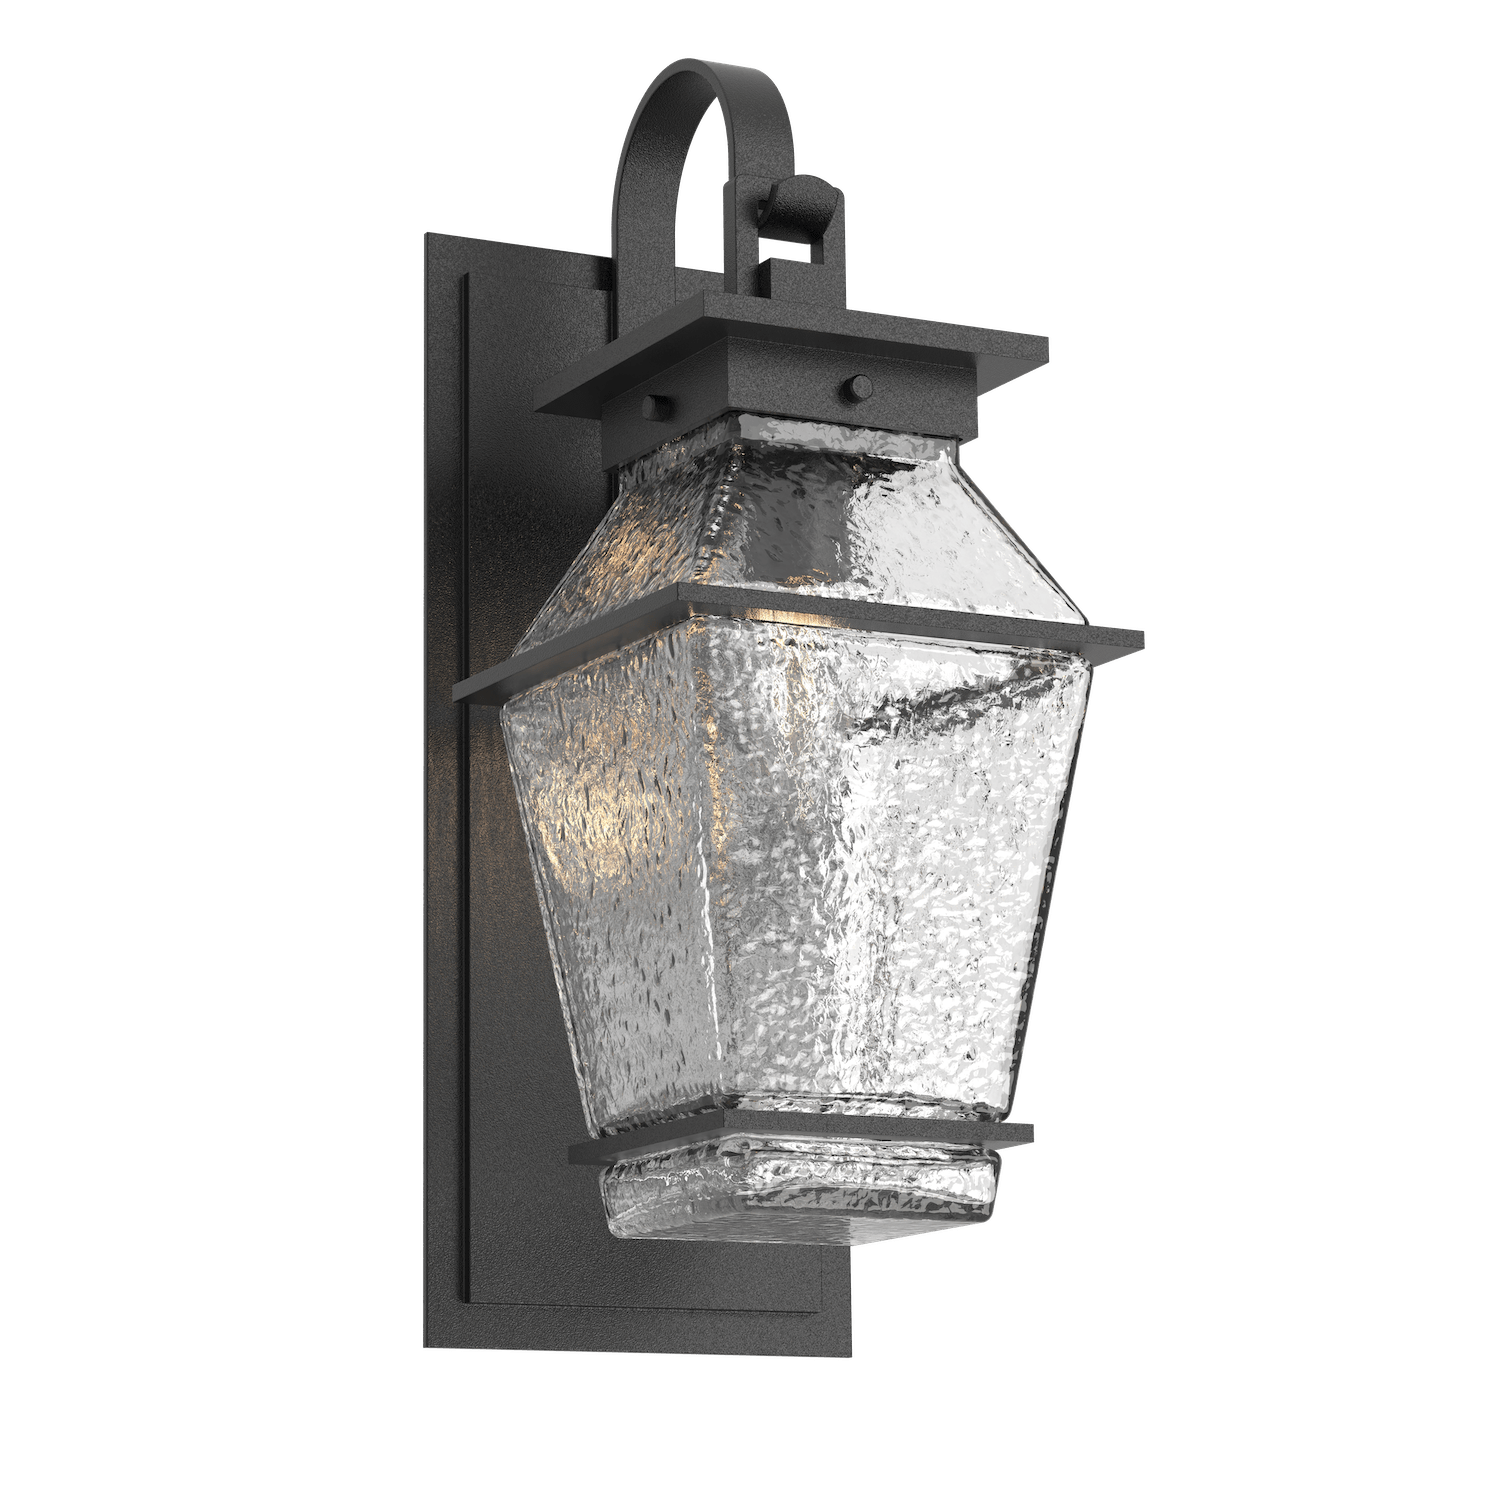 ODB0077-02-TB-C-Hammerton-Studio-Landmark-19-inch-outdoor-sconce-with-shepherds-hook-with-textured-black-finish-and-clear-blown-glass-shades-and-incandescent-lamping